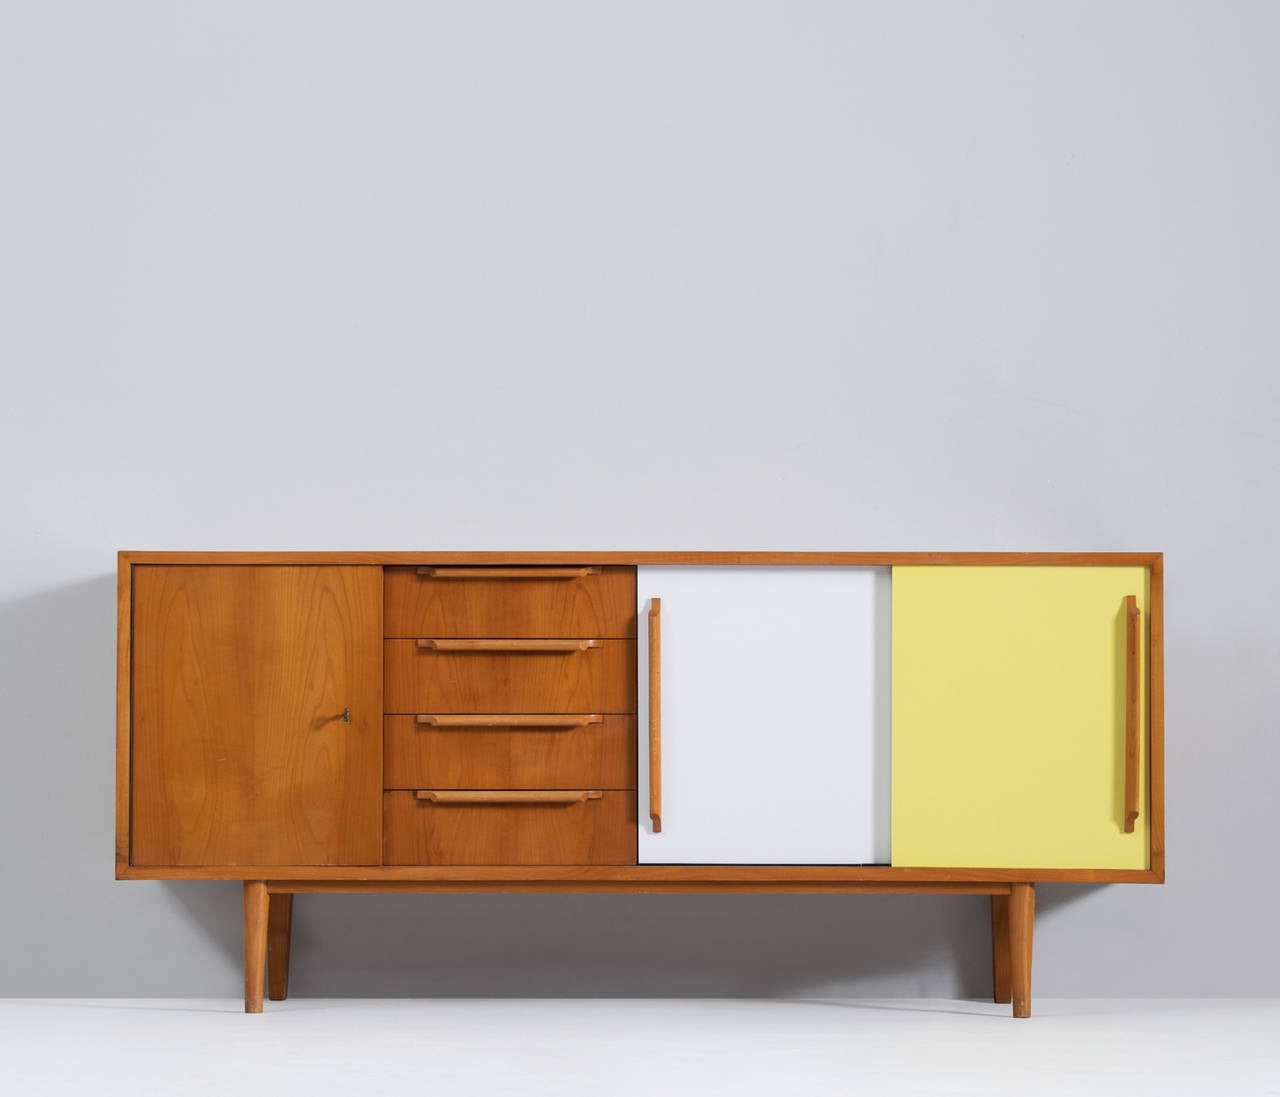 Sideboard designed for Belgium manufacture Van den Berghe-Pouvers, 1950s.

High quality piece, with elegant details. For instance, the warm look and grain of the cherrywood is in nice contrast reflected by the colored sliding doors.

The